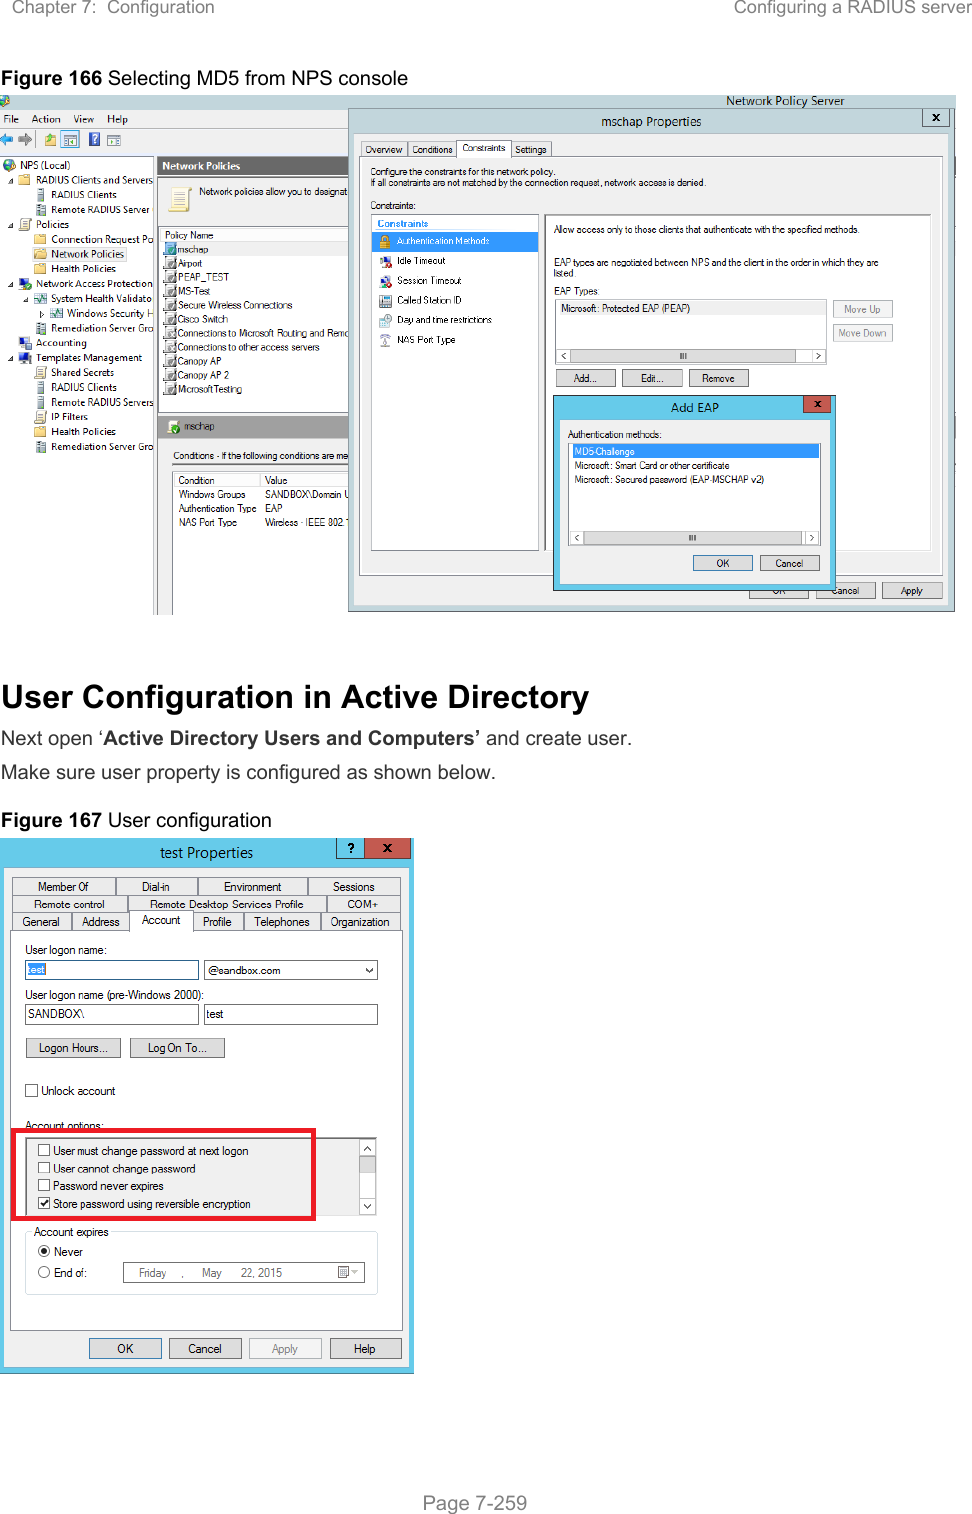 Chapter 7:  Configuration  Configuring a RADIUS server   Page 7-259 Figure 166 Selecting MD5 from NPS console   User Configuration in Active Directory Next open ‘Active Directory Users and Computers’ and create user. Make sure user property is configured as shown below. Figure 167 User configuration    